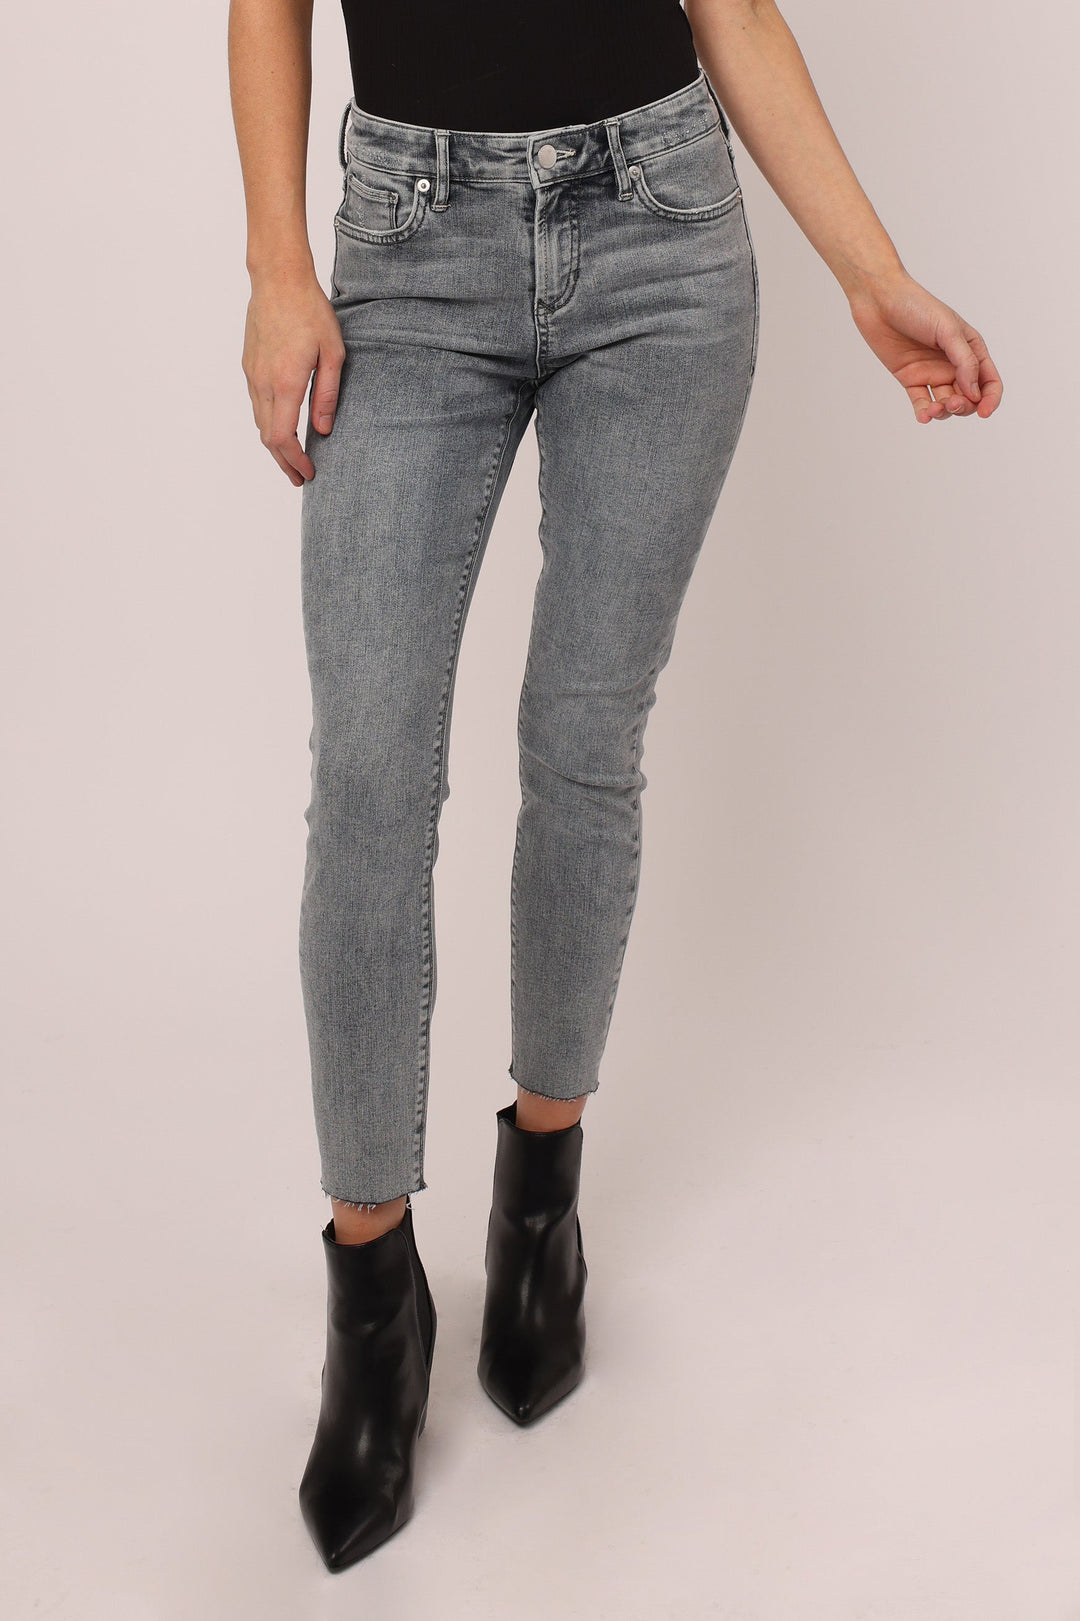 image of a female model wearing a GISELE HIGH RISE ANKLE SKINNY JEANS FAIRFAX JEANS